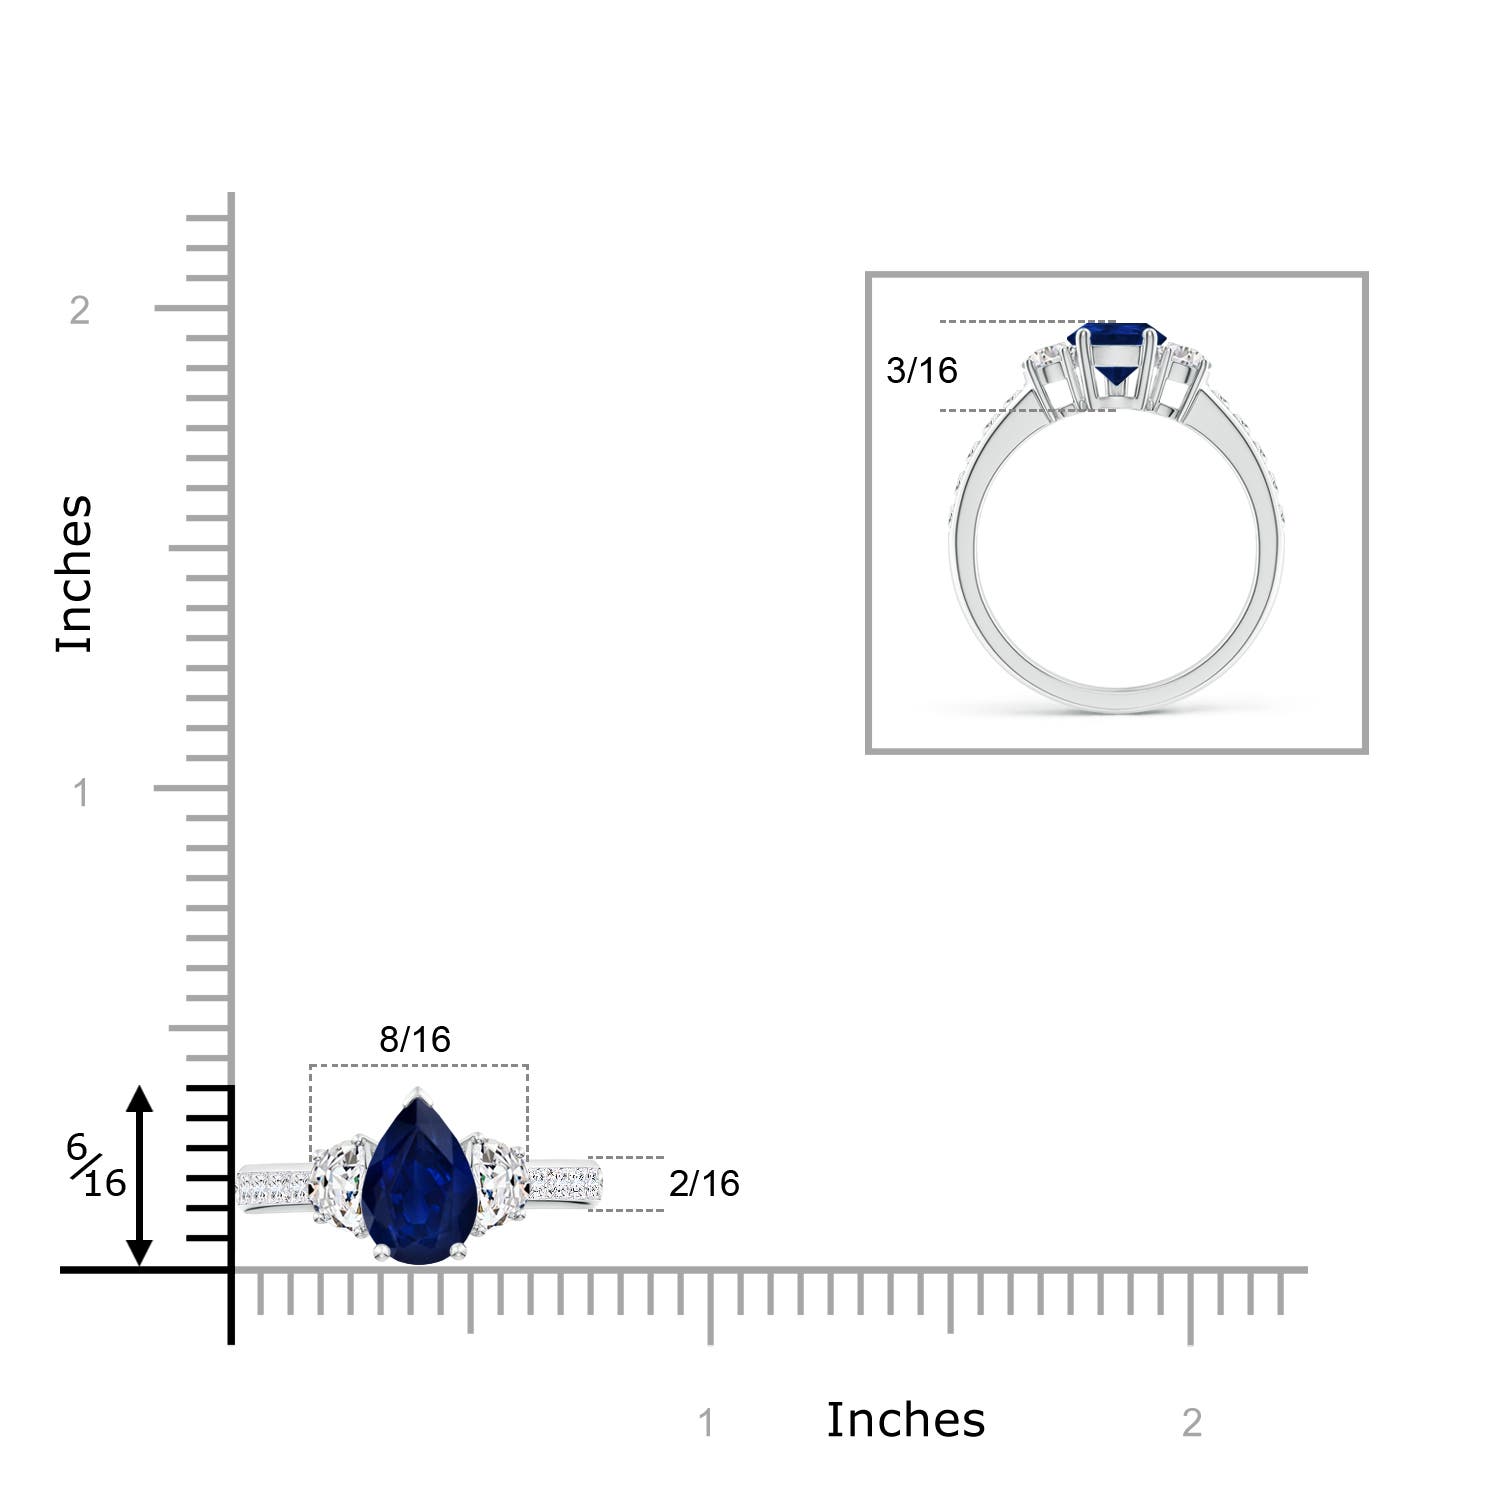 AA - Blue Sapphire / 2.48 CT / 14 KT White Gold